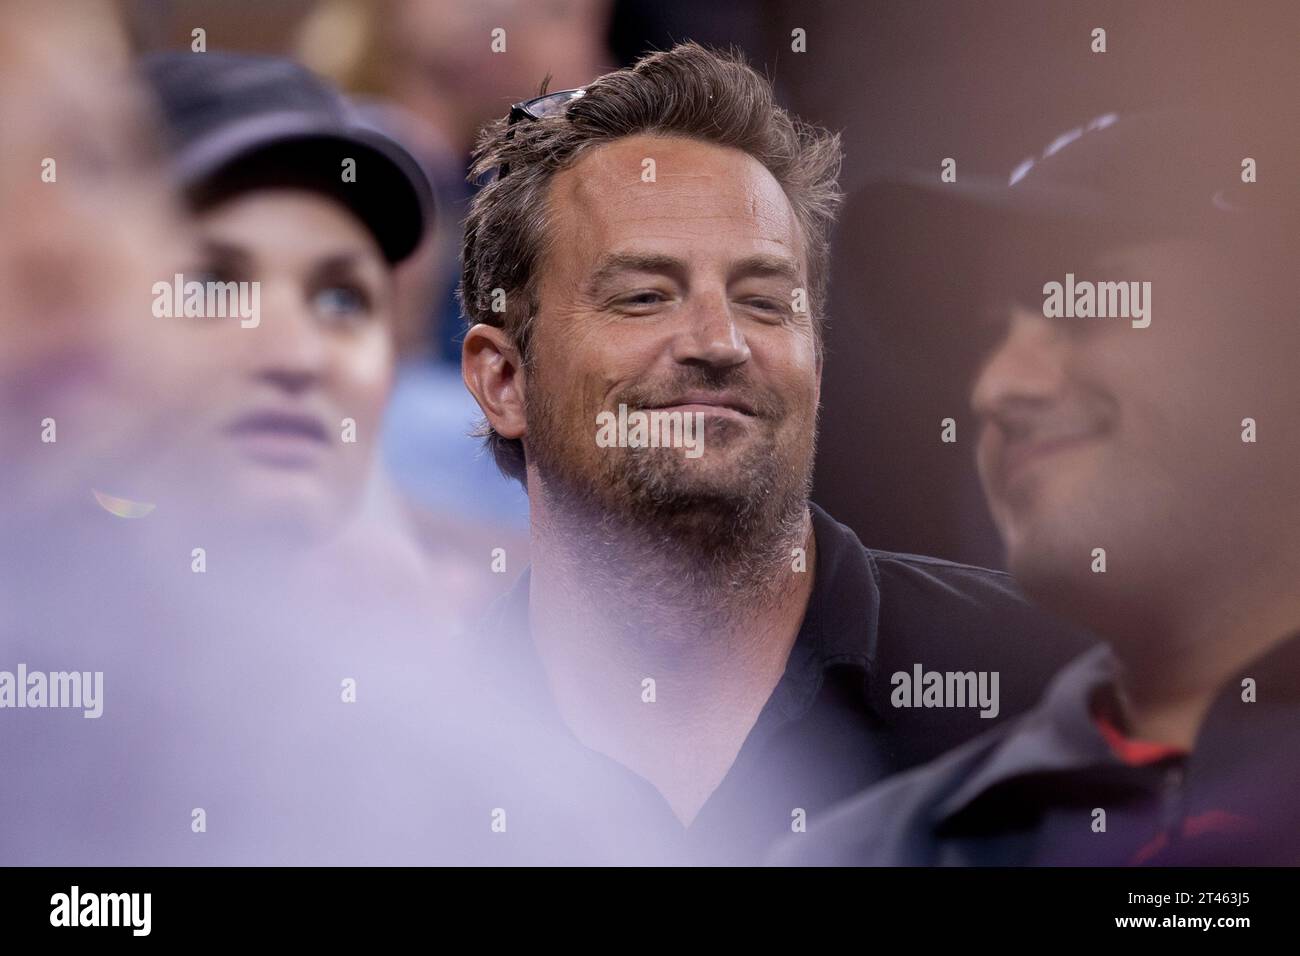 NEW YORK, NY - SEPTEMBER 08:  Matthew Perry attends Day 11 of the 2011 U.S. Open Tennis Championships at the USTA Billie Jean King National Tennis Center in Flushing, Queens, New York, USA.on September 8, 2011 in the Flushing neighborhood of the Queens borough of New York City   People:  Matthew Perry Stock Photo